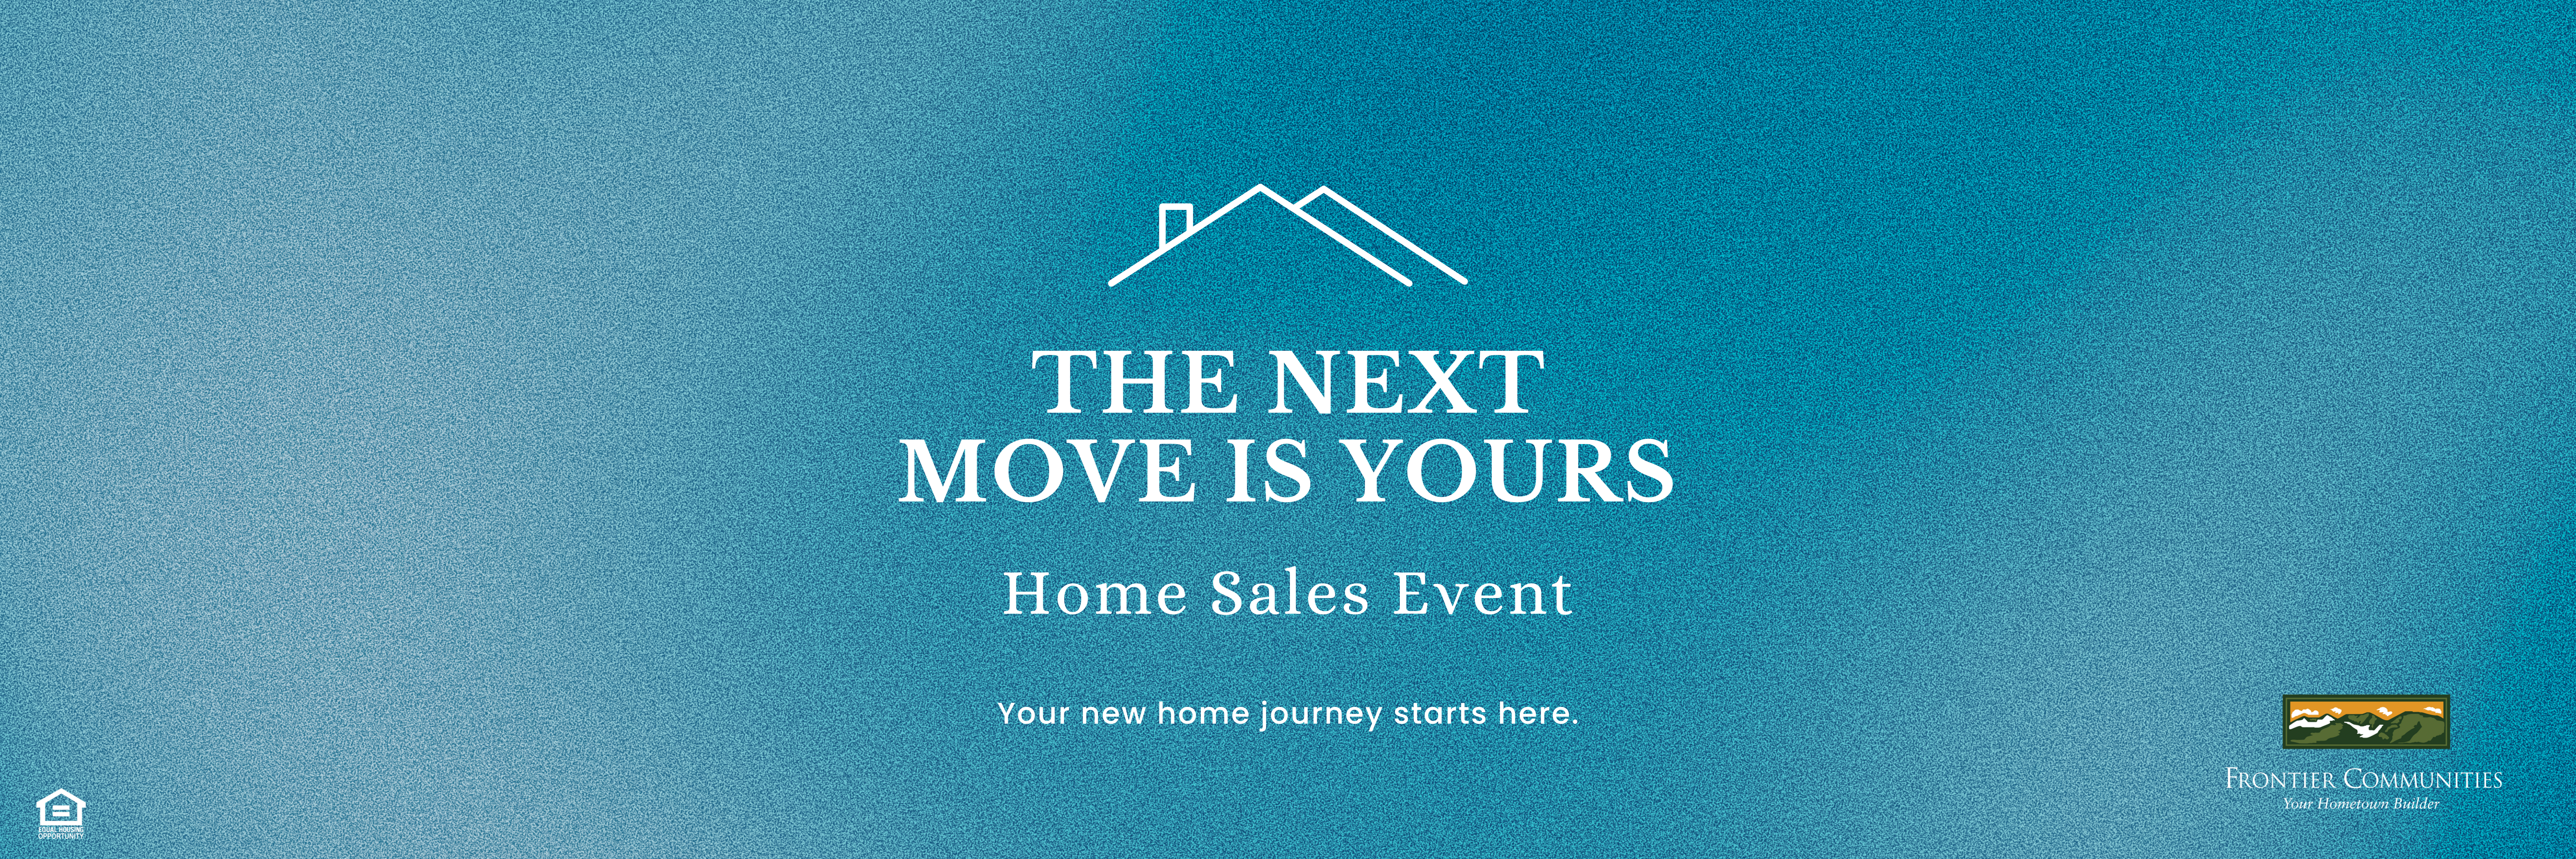 Move is yours event (6912 × 2304 px)